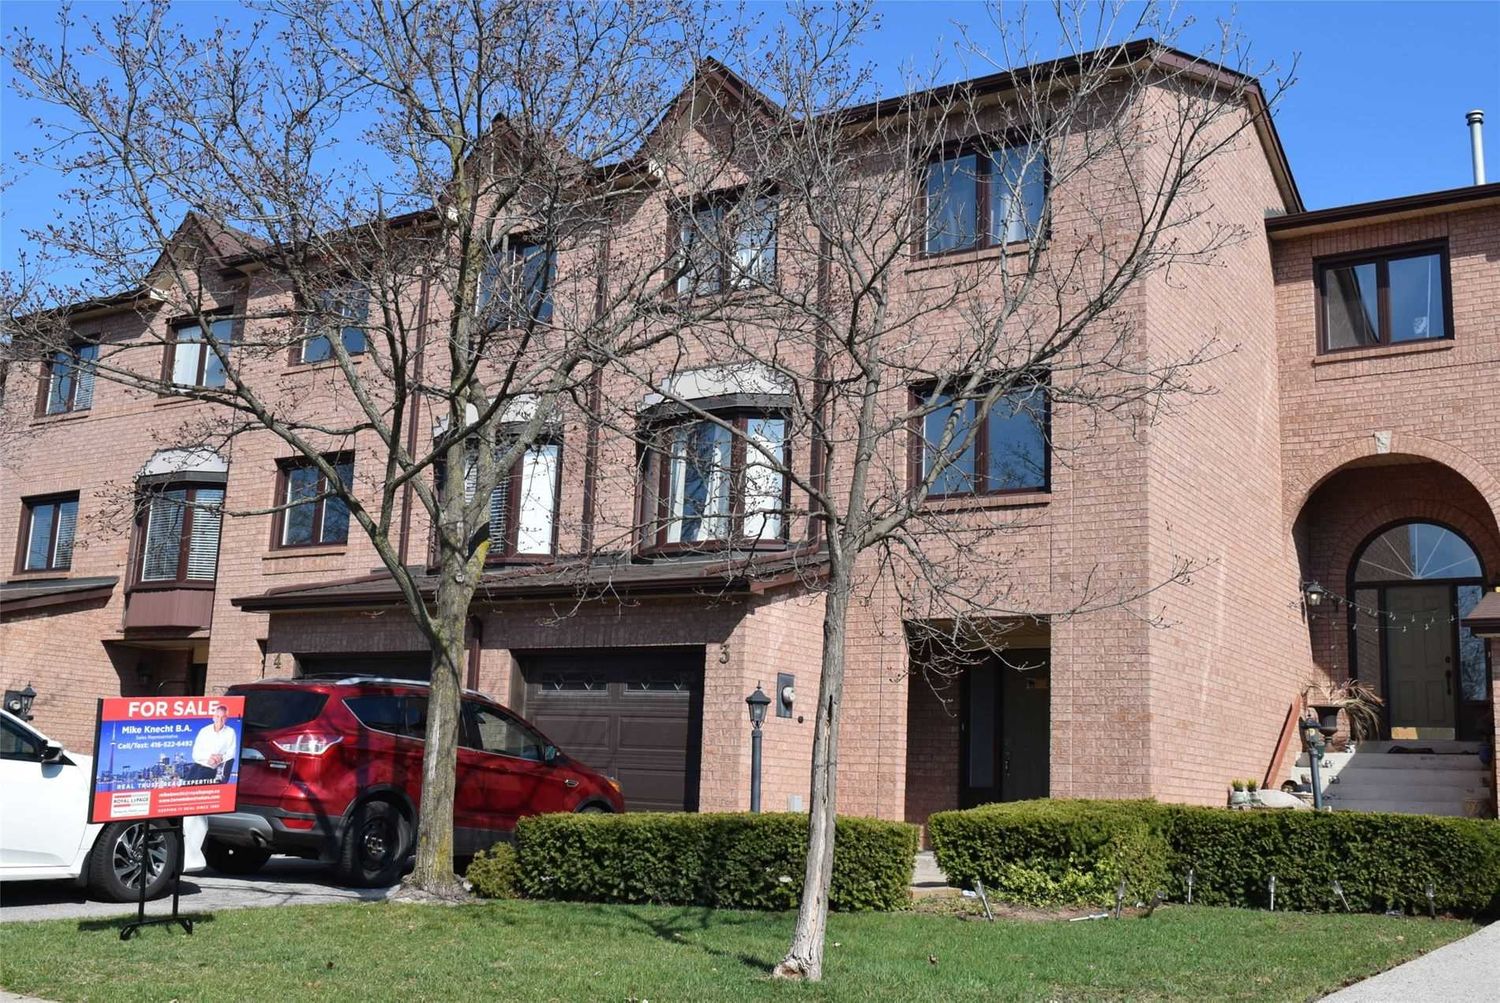 1100 Queens Avenue. 1100 Queens Avenue Townhomes is located in  Oakville, Toronto - image #2 of 2